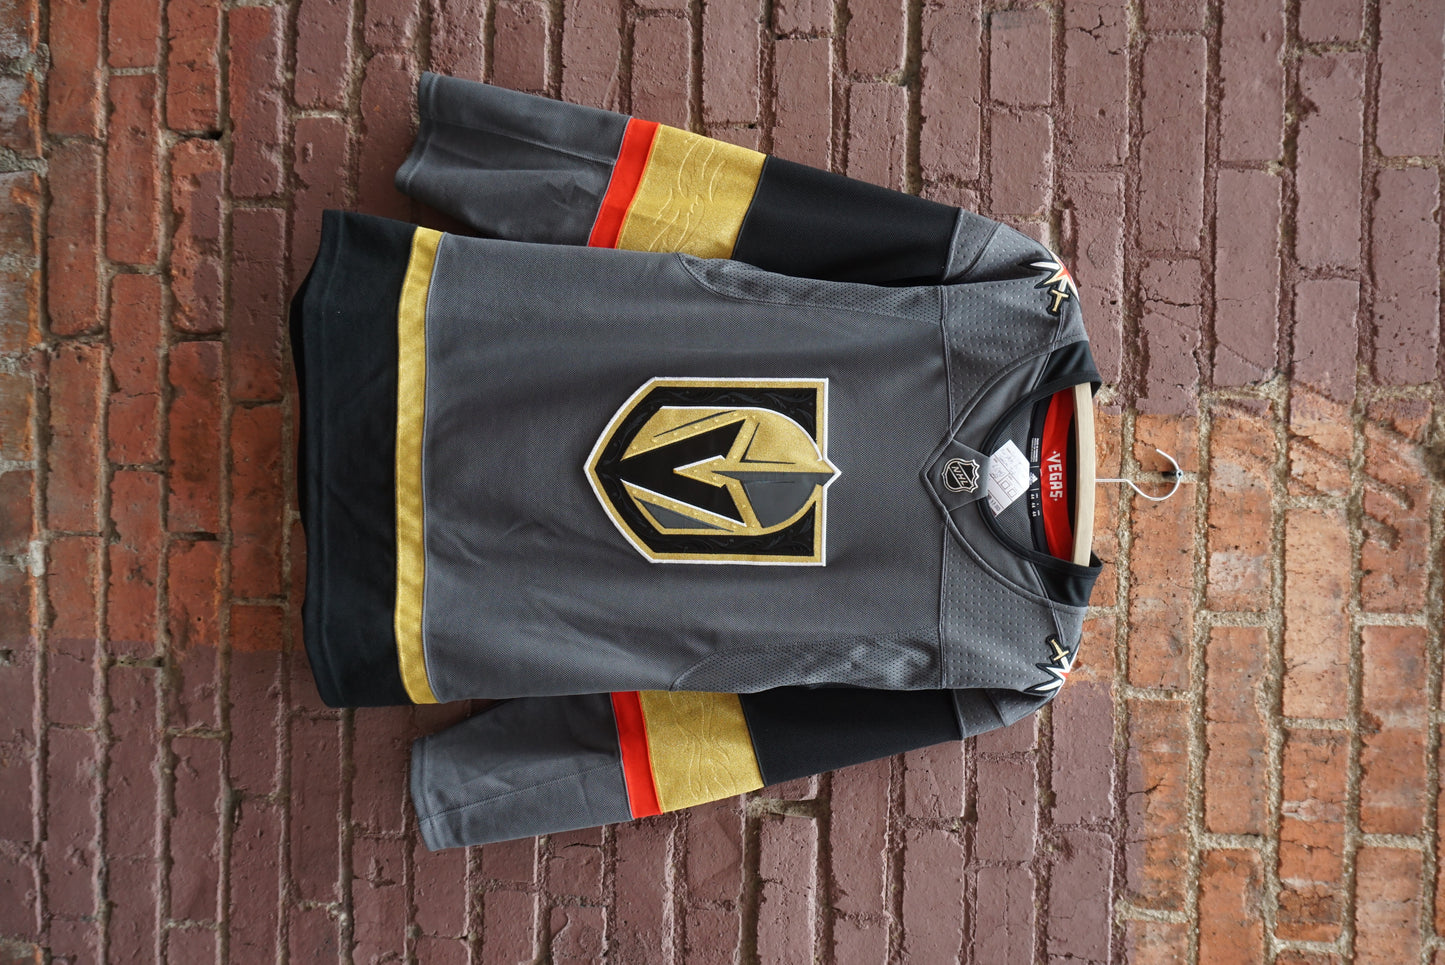 Las Vegas Golden Knights Hockey Jersey - Size Large - 2017 inaugural Season/ Stanley Cup appearance